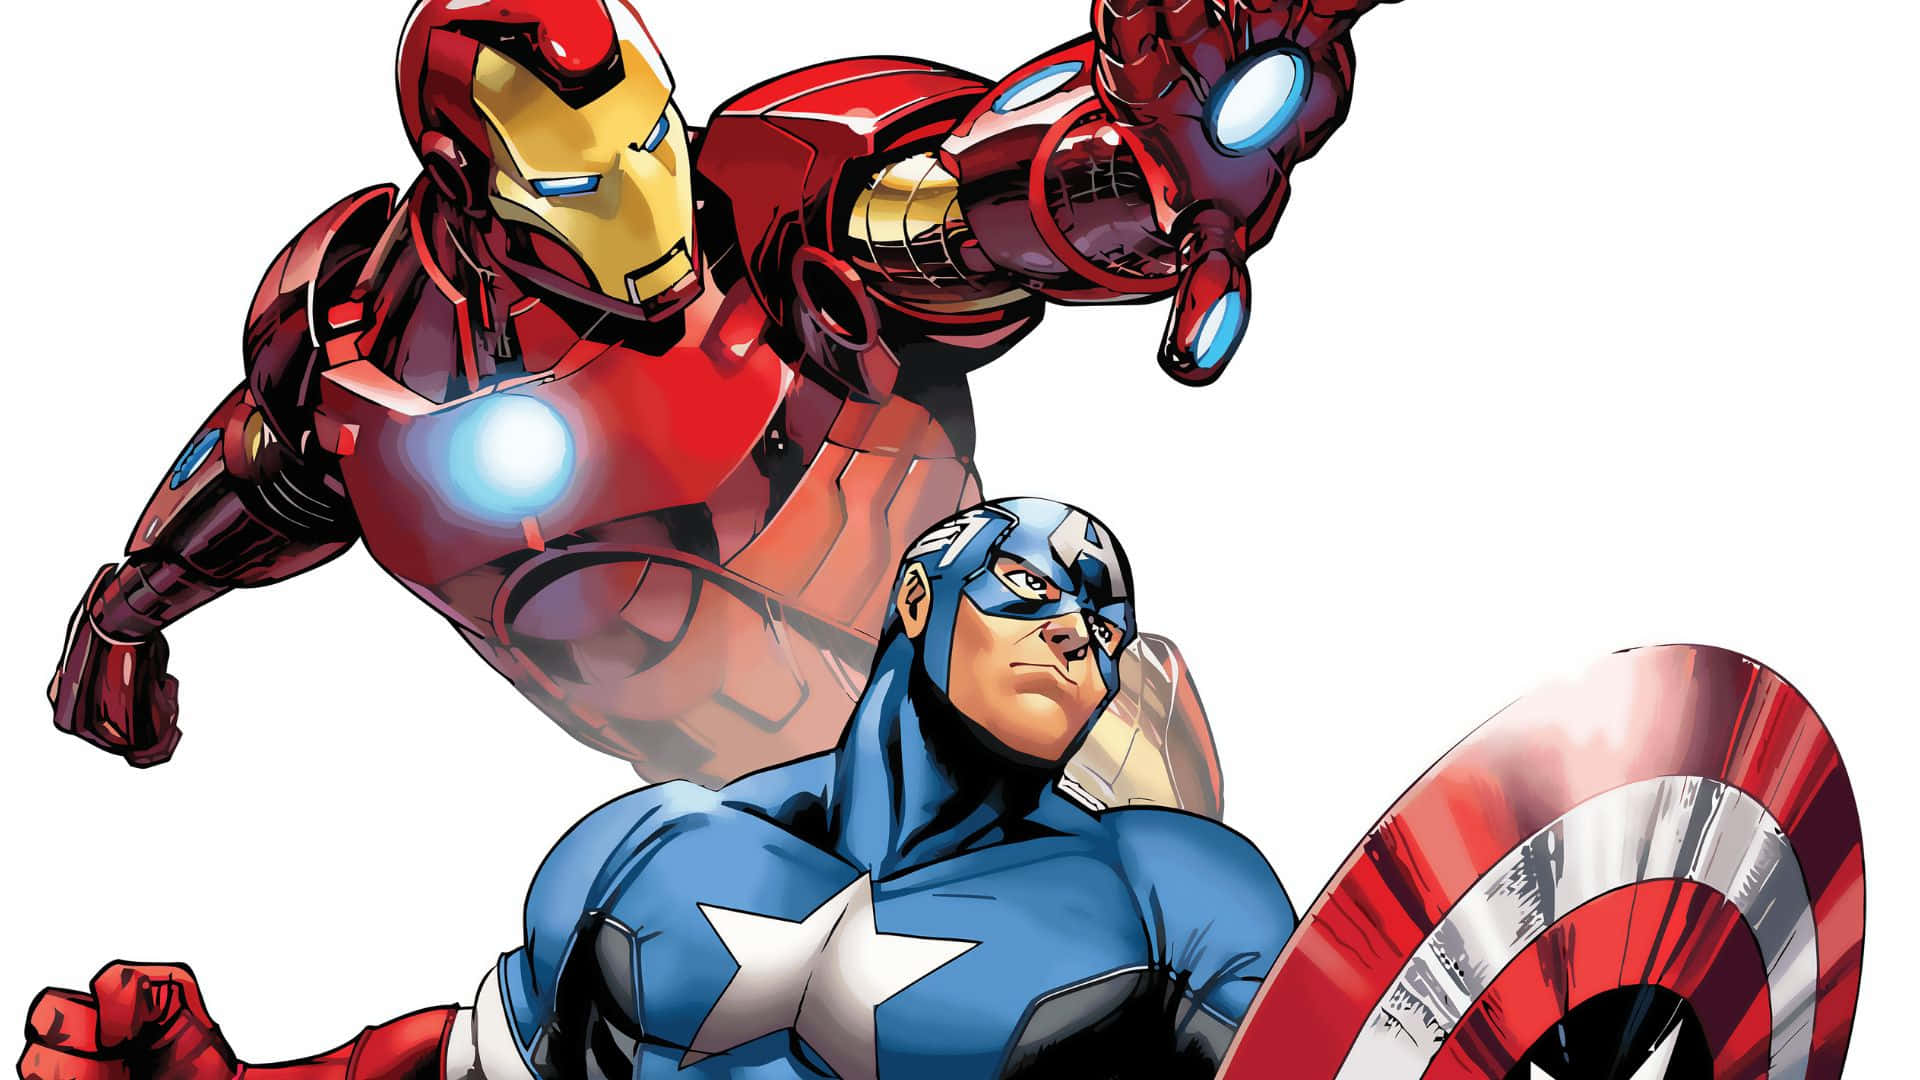 The epic battle between Iron Man and Captain America! Wallpaper